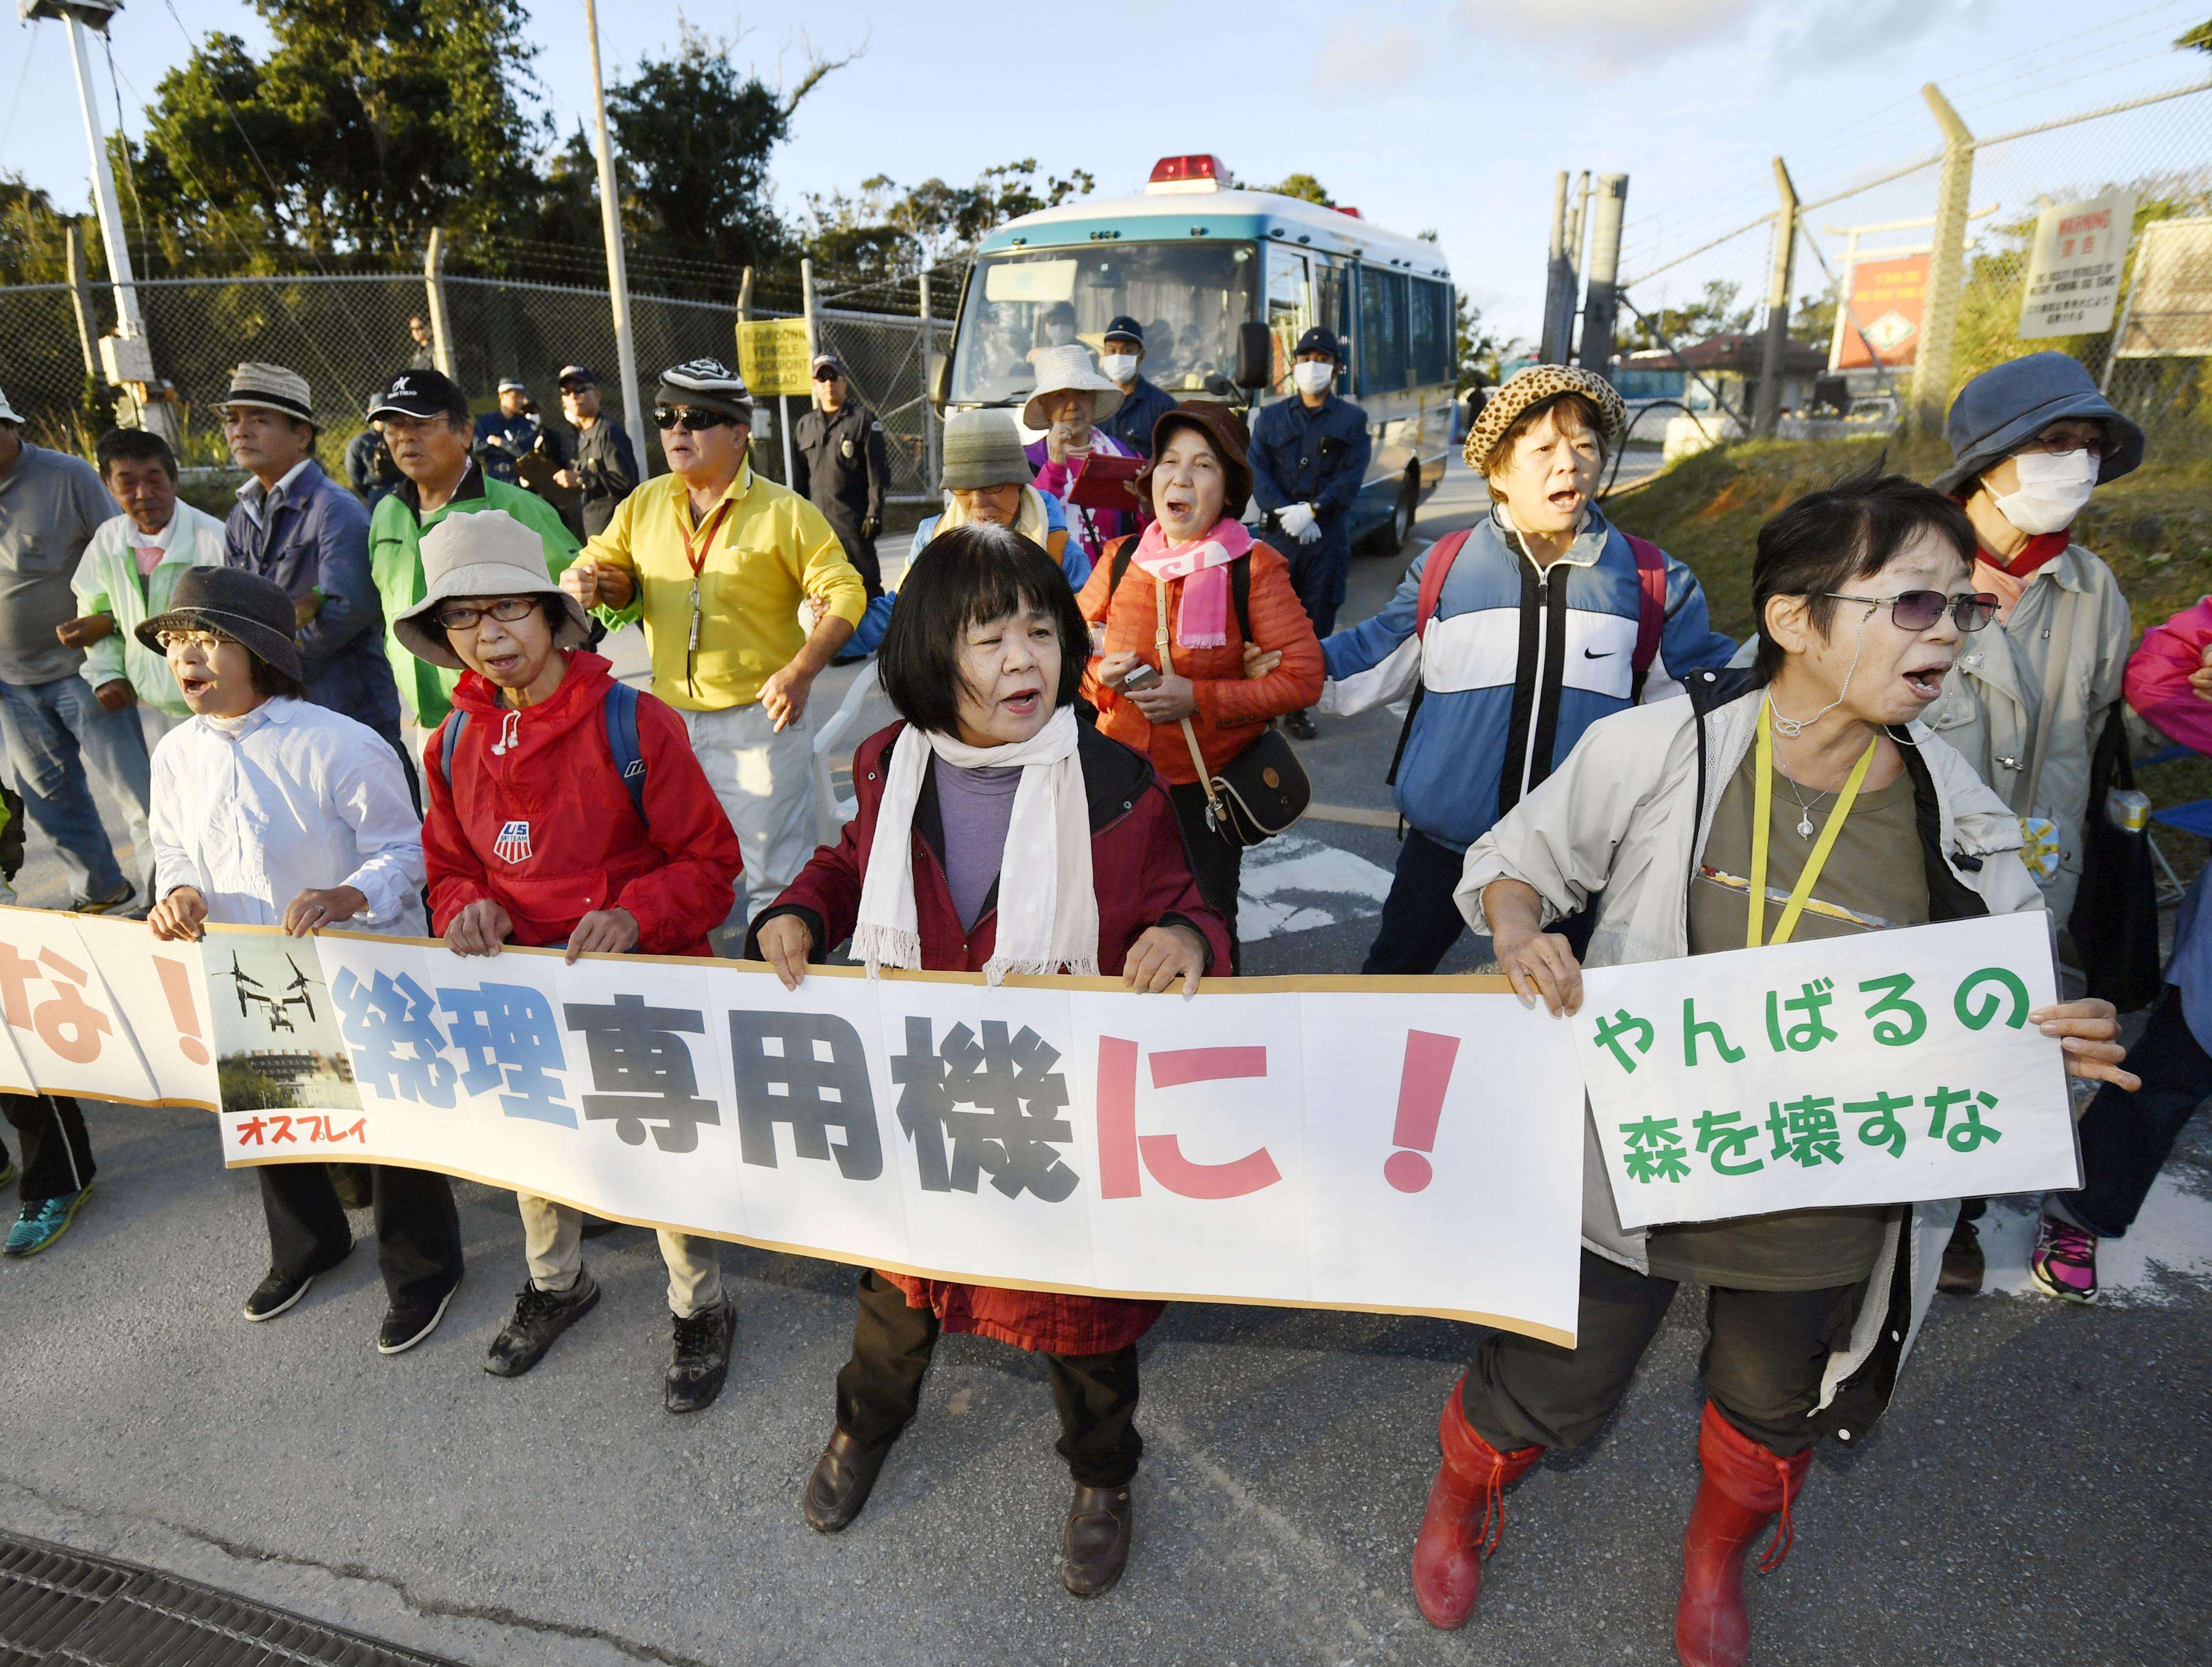 People stage a rally against the construction of a helipad near the US military's Northern Training Area in the village of Higashi. Photo: Kyodo